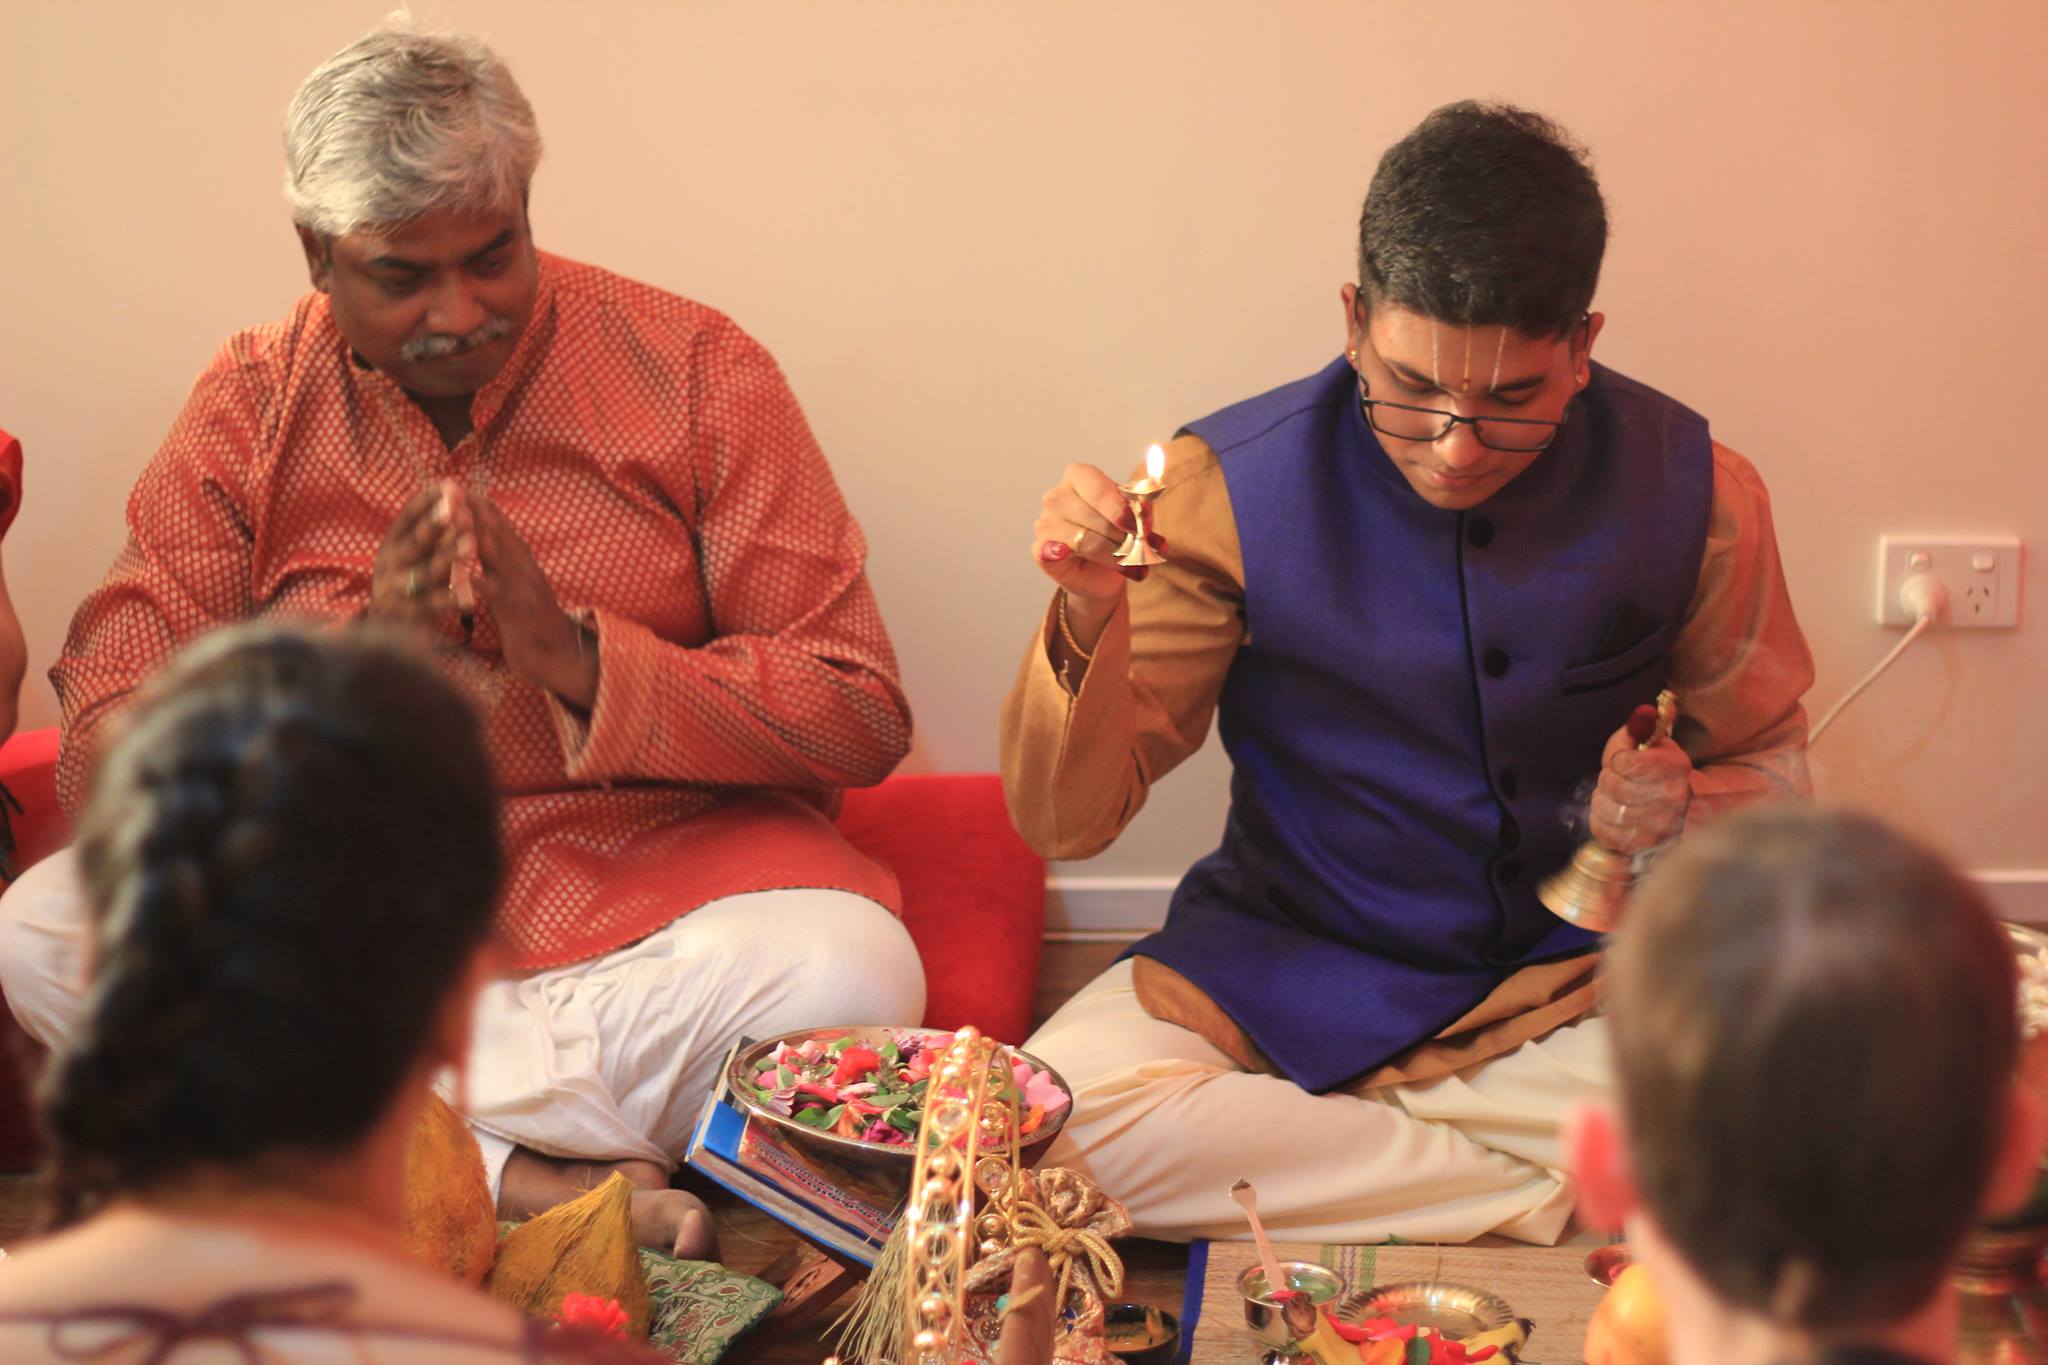 Since no priest agreed to perform the ceremony, Salaphaty (who is a trained priest) himself officiated the Niscayatharta Ceremony with Vishvakshena Aradhana and Varuna Puja